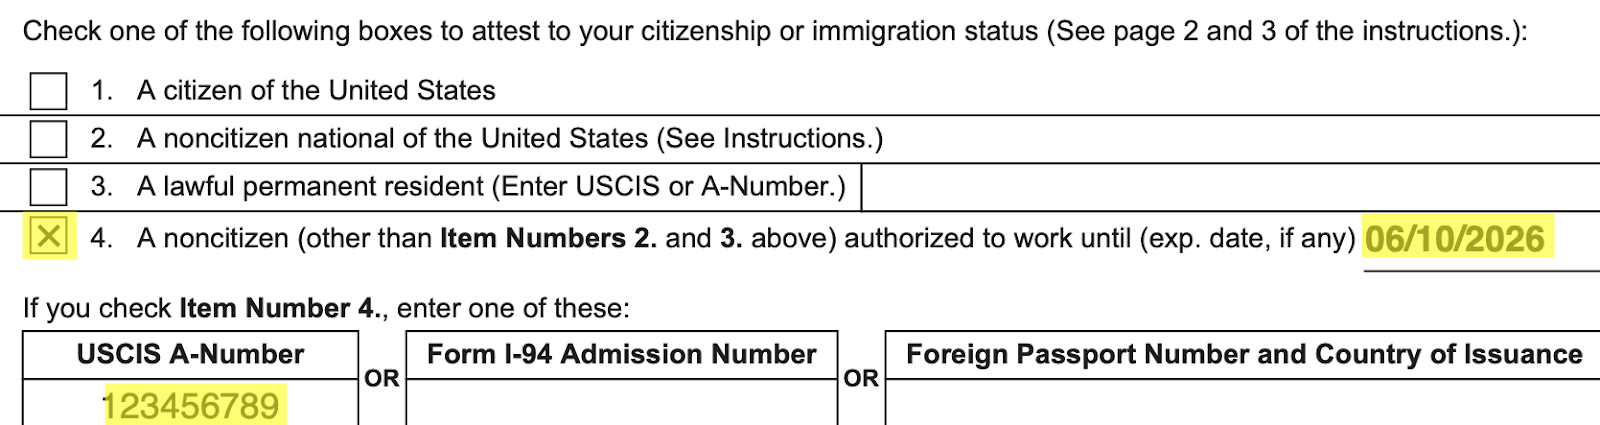 Form I-9's Section 1 Citizenship and Immigration area with a checkmark in the box next to option 4 for a noncitizen, plus the new hire's work authorization expiration date and USCIS number.